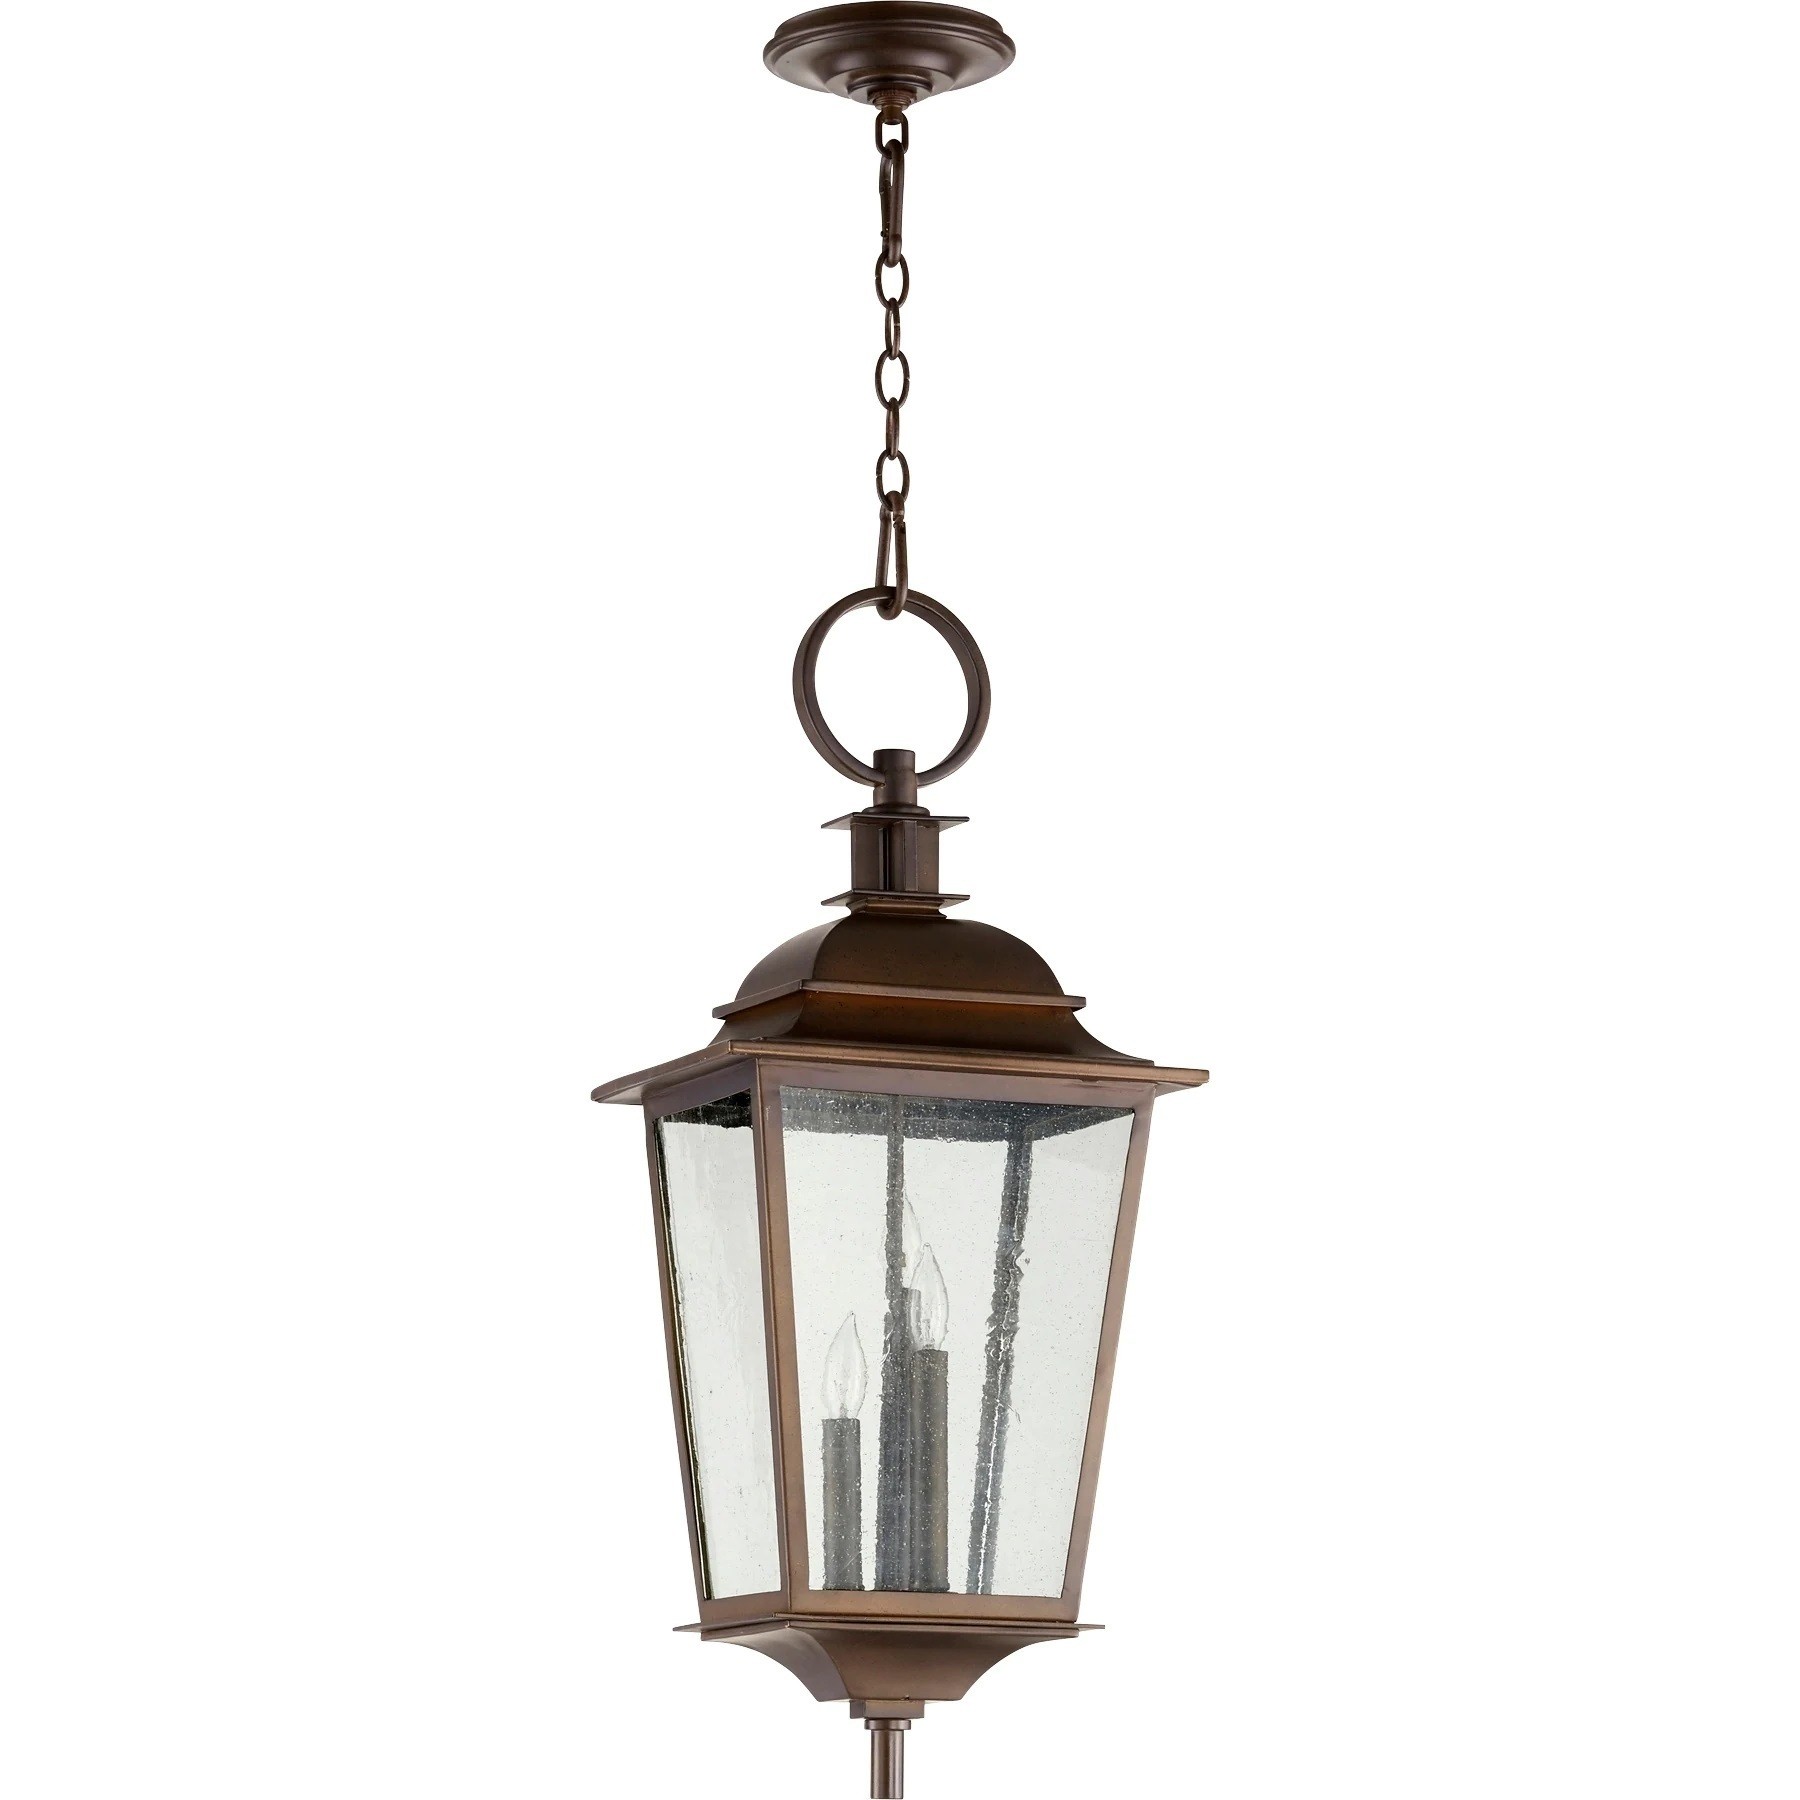 Traditional looking extra large outdoor hanging light with candles